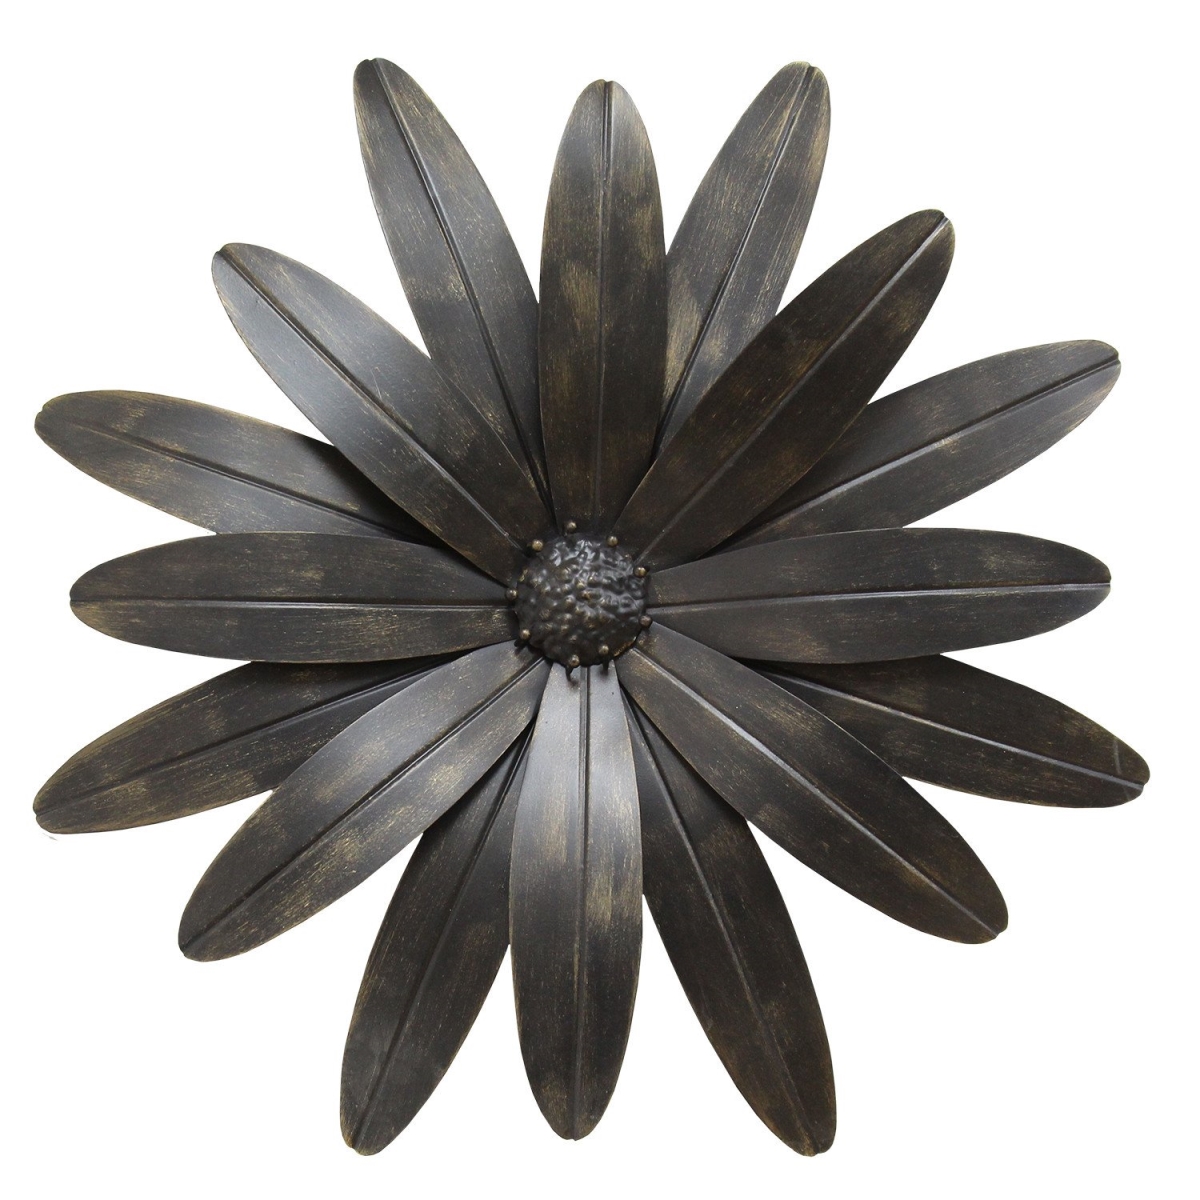 Home Roots 321127 Industrial Flower Wall Decor, Black